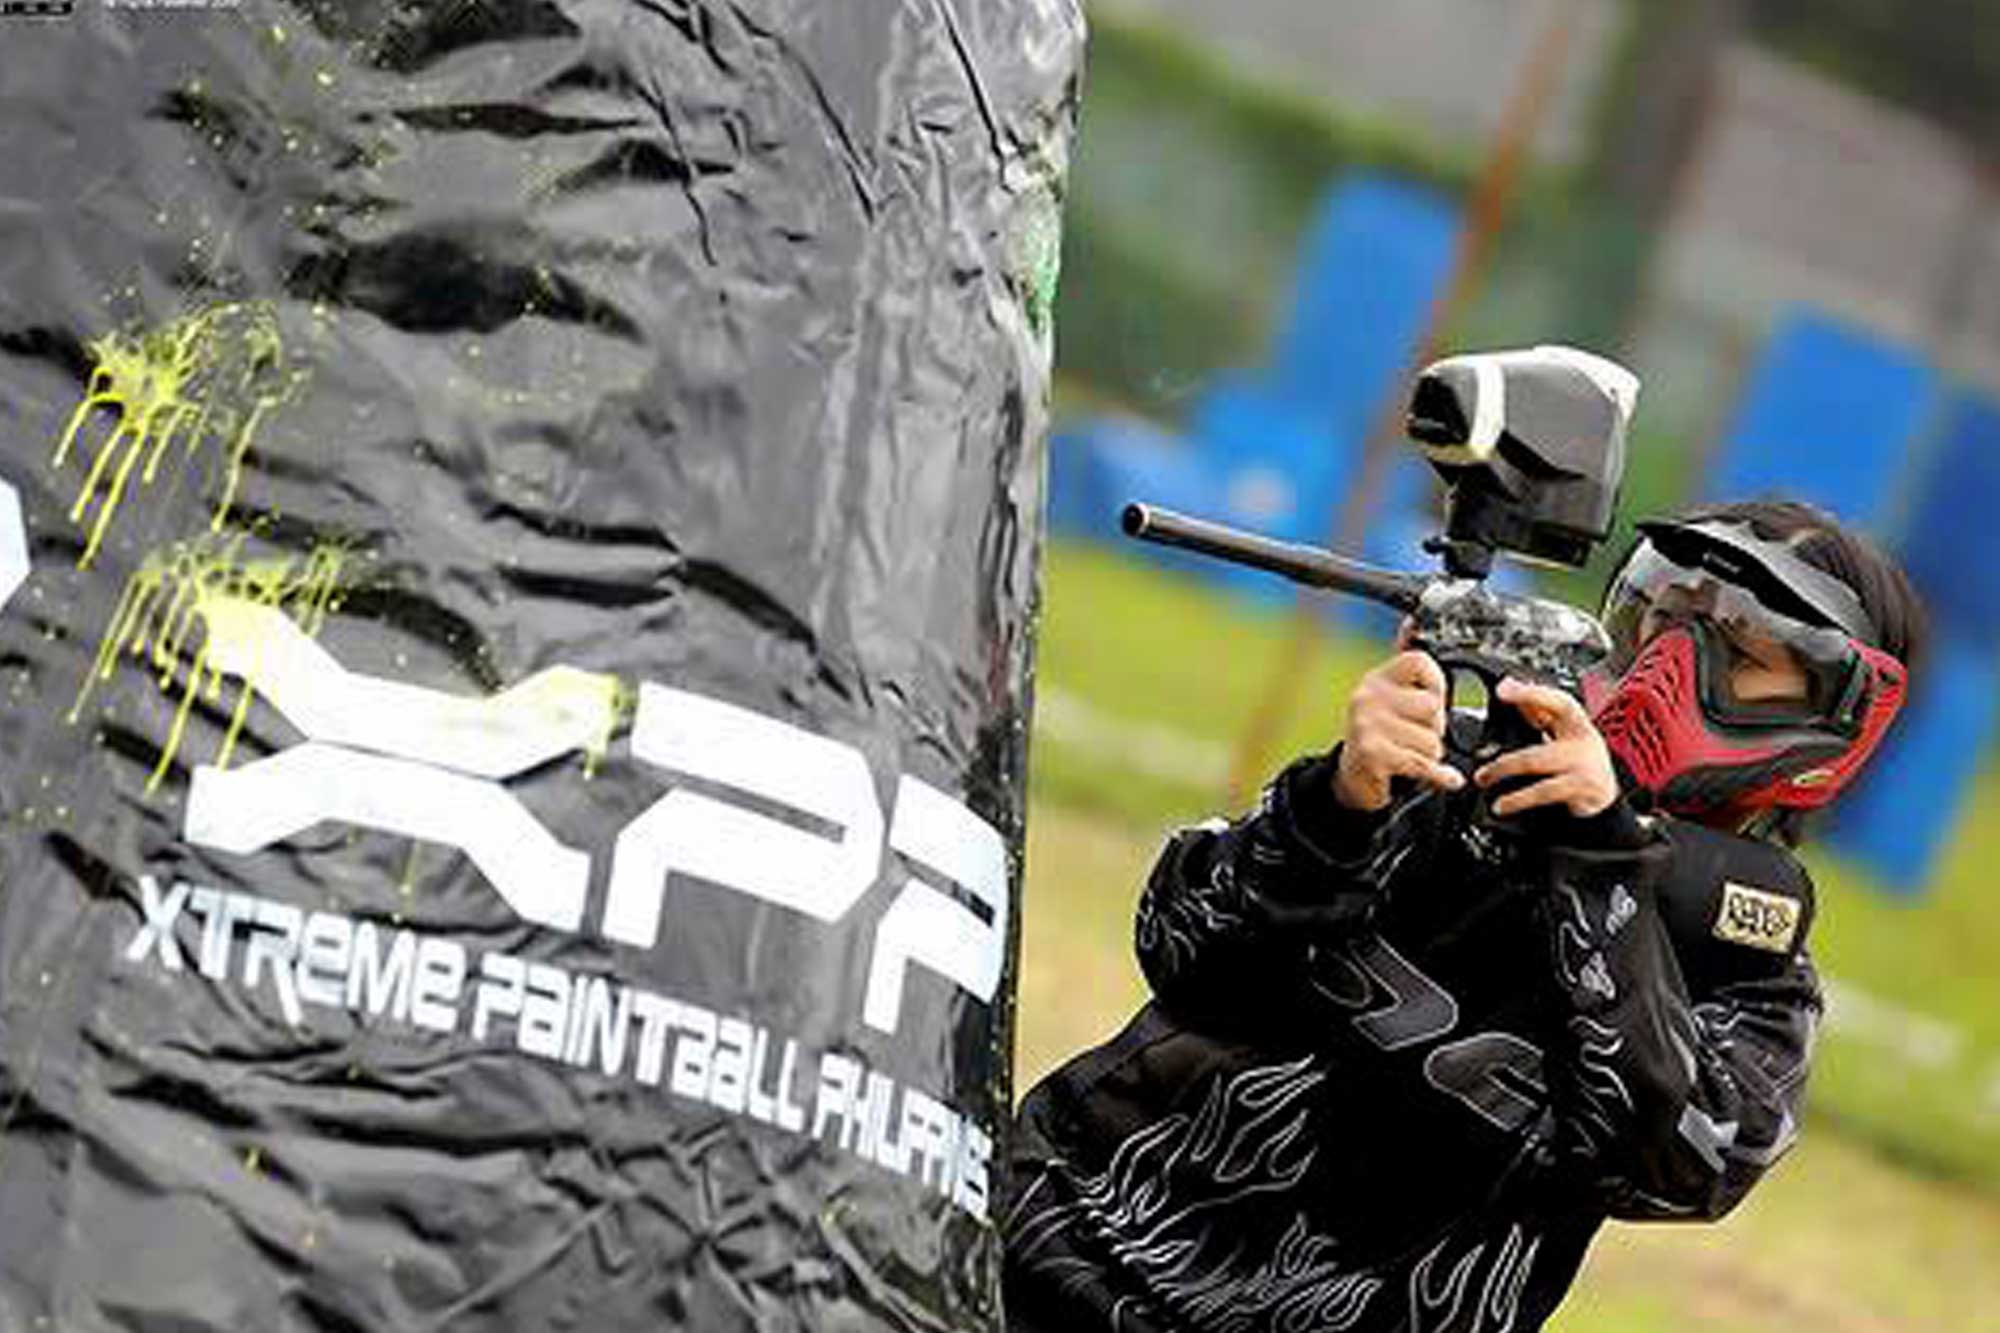 Xtreme Paintball Philippines